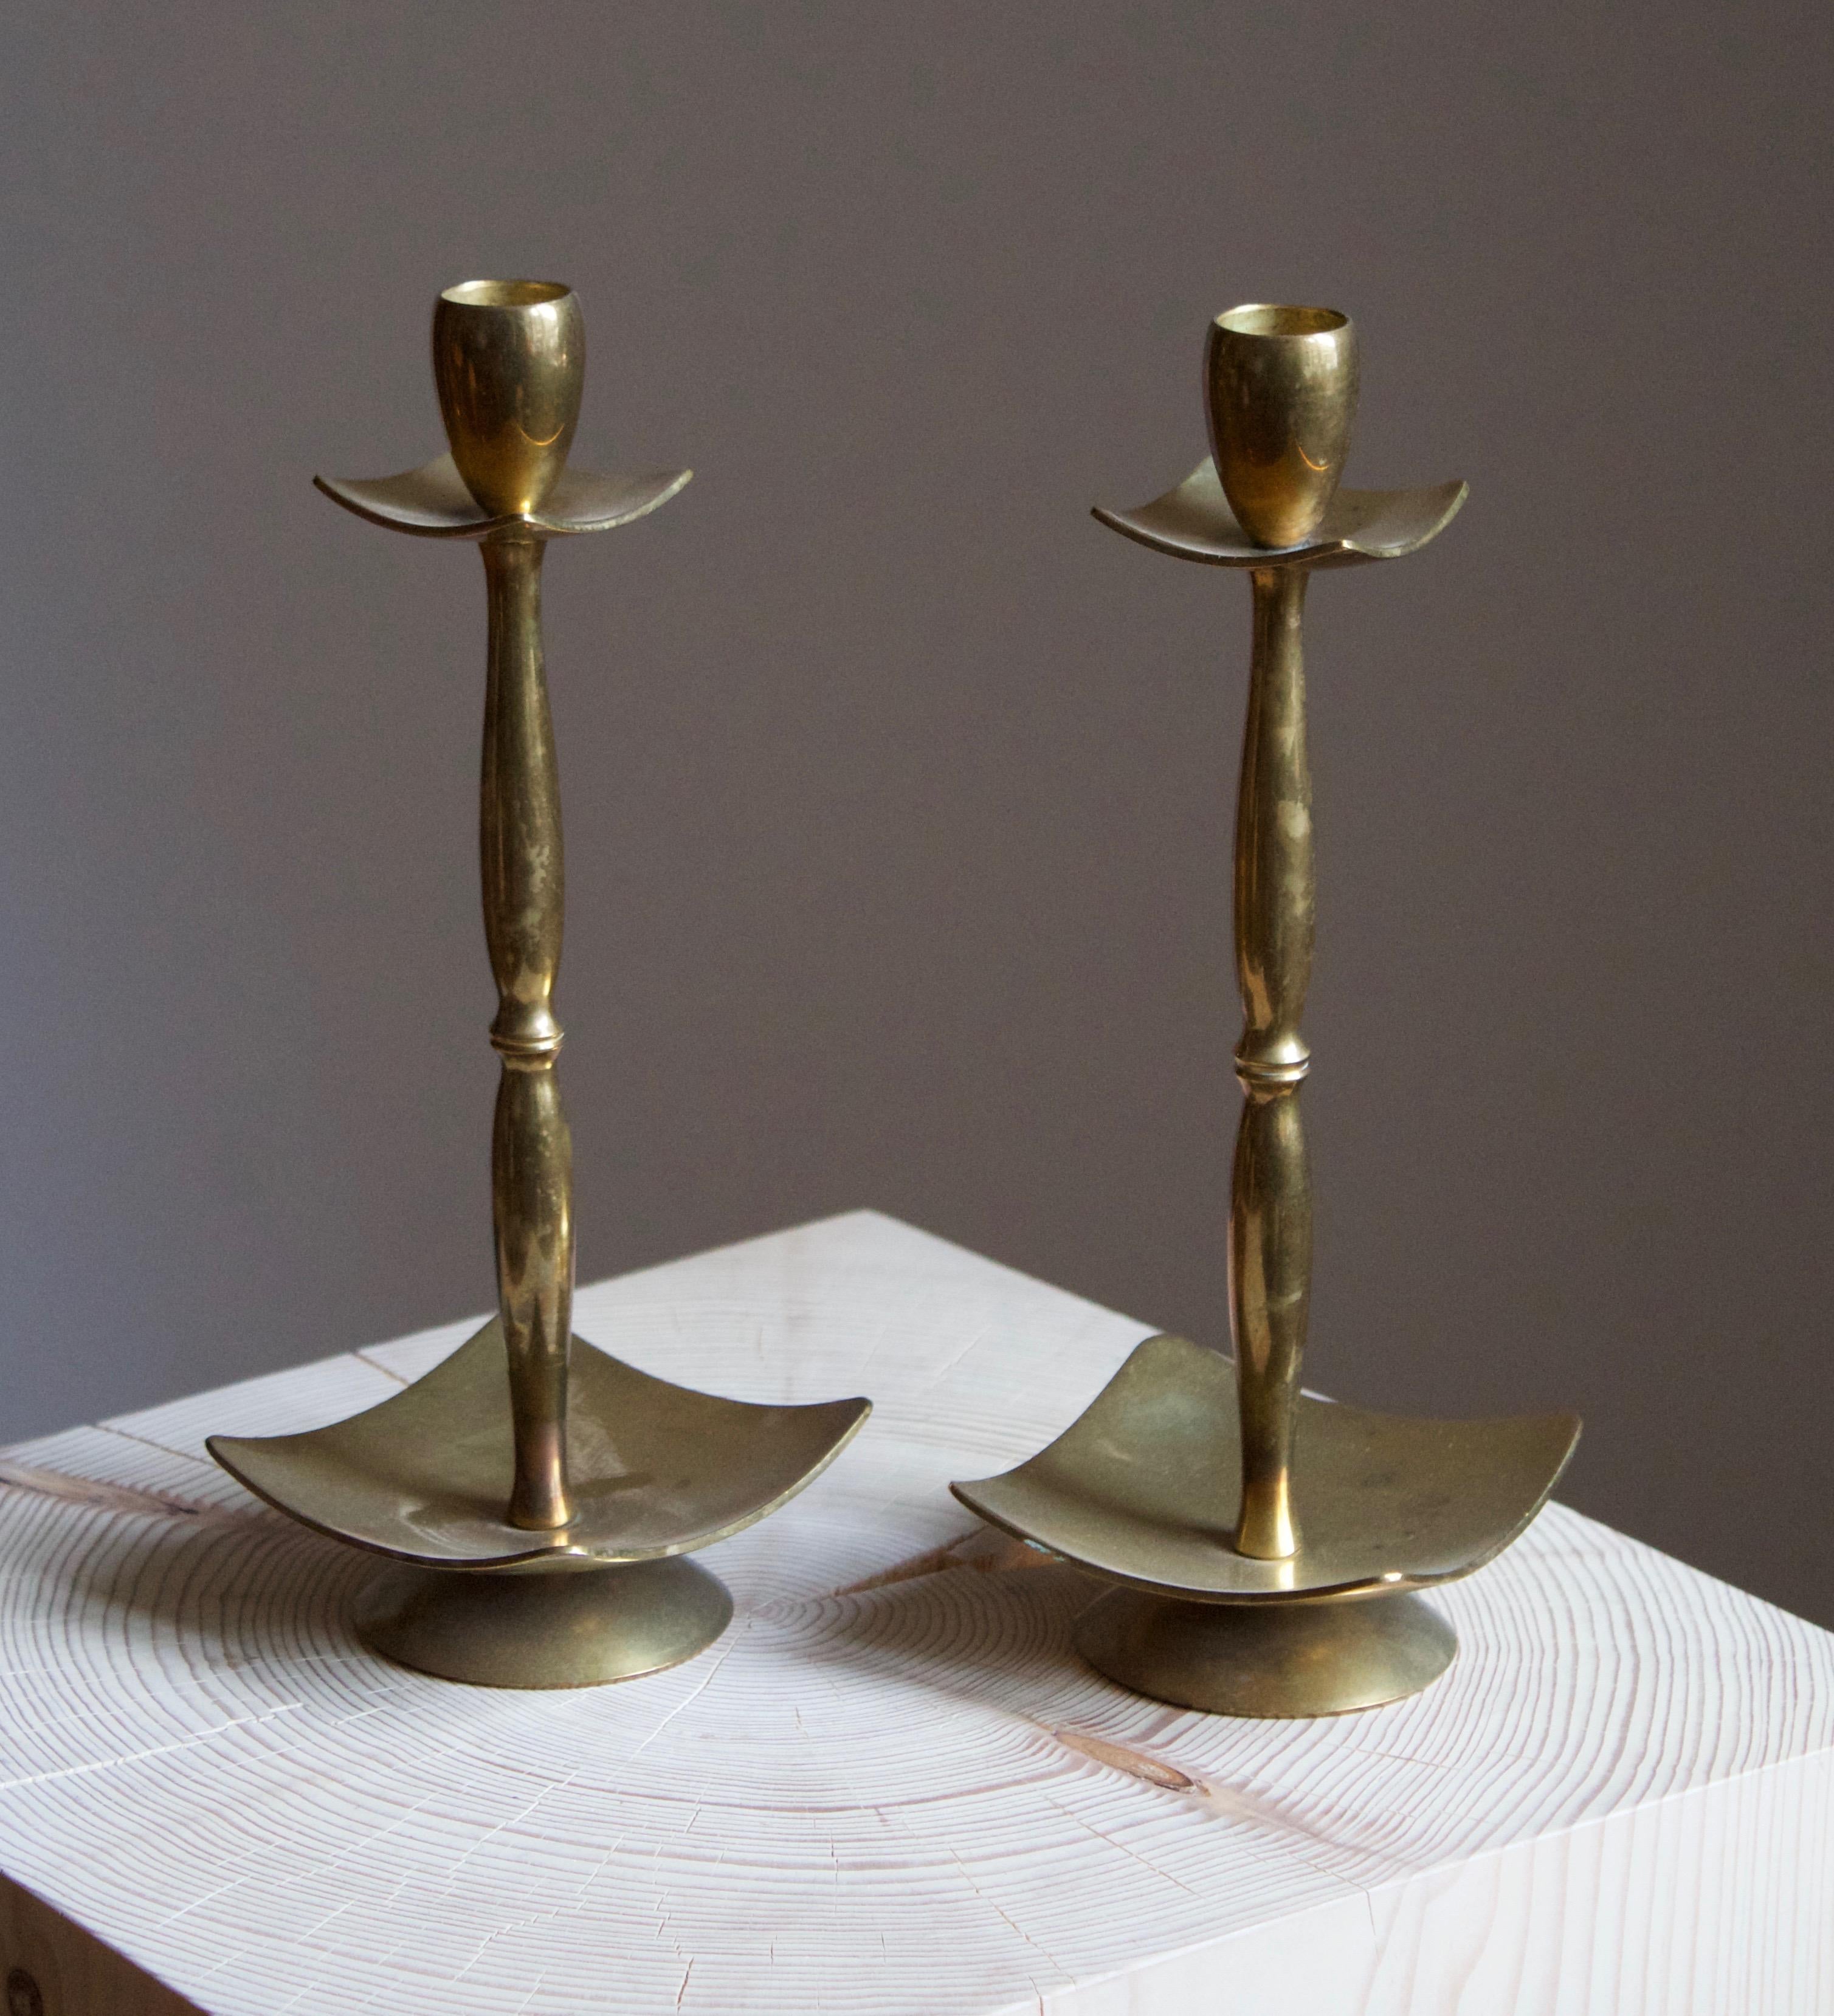 A pair of modernist candlesticks. Designed and produced by Dantorp, Denmark, 1960s. In brass.